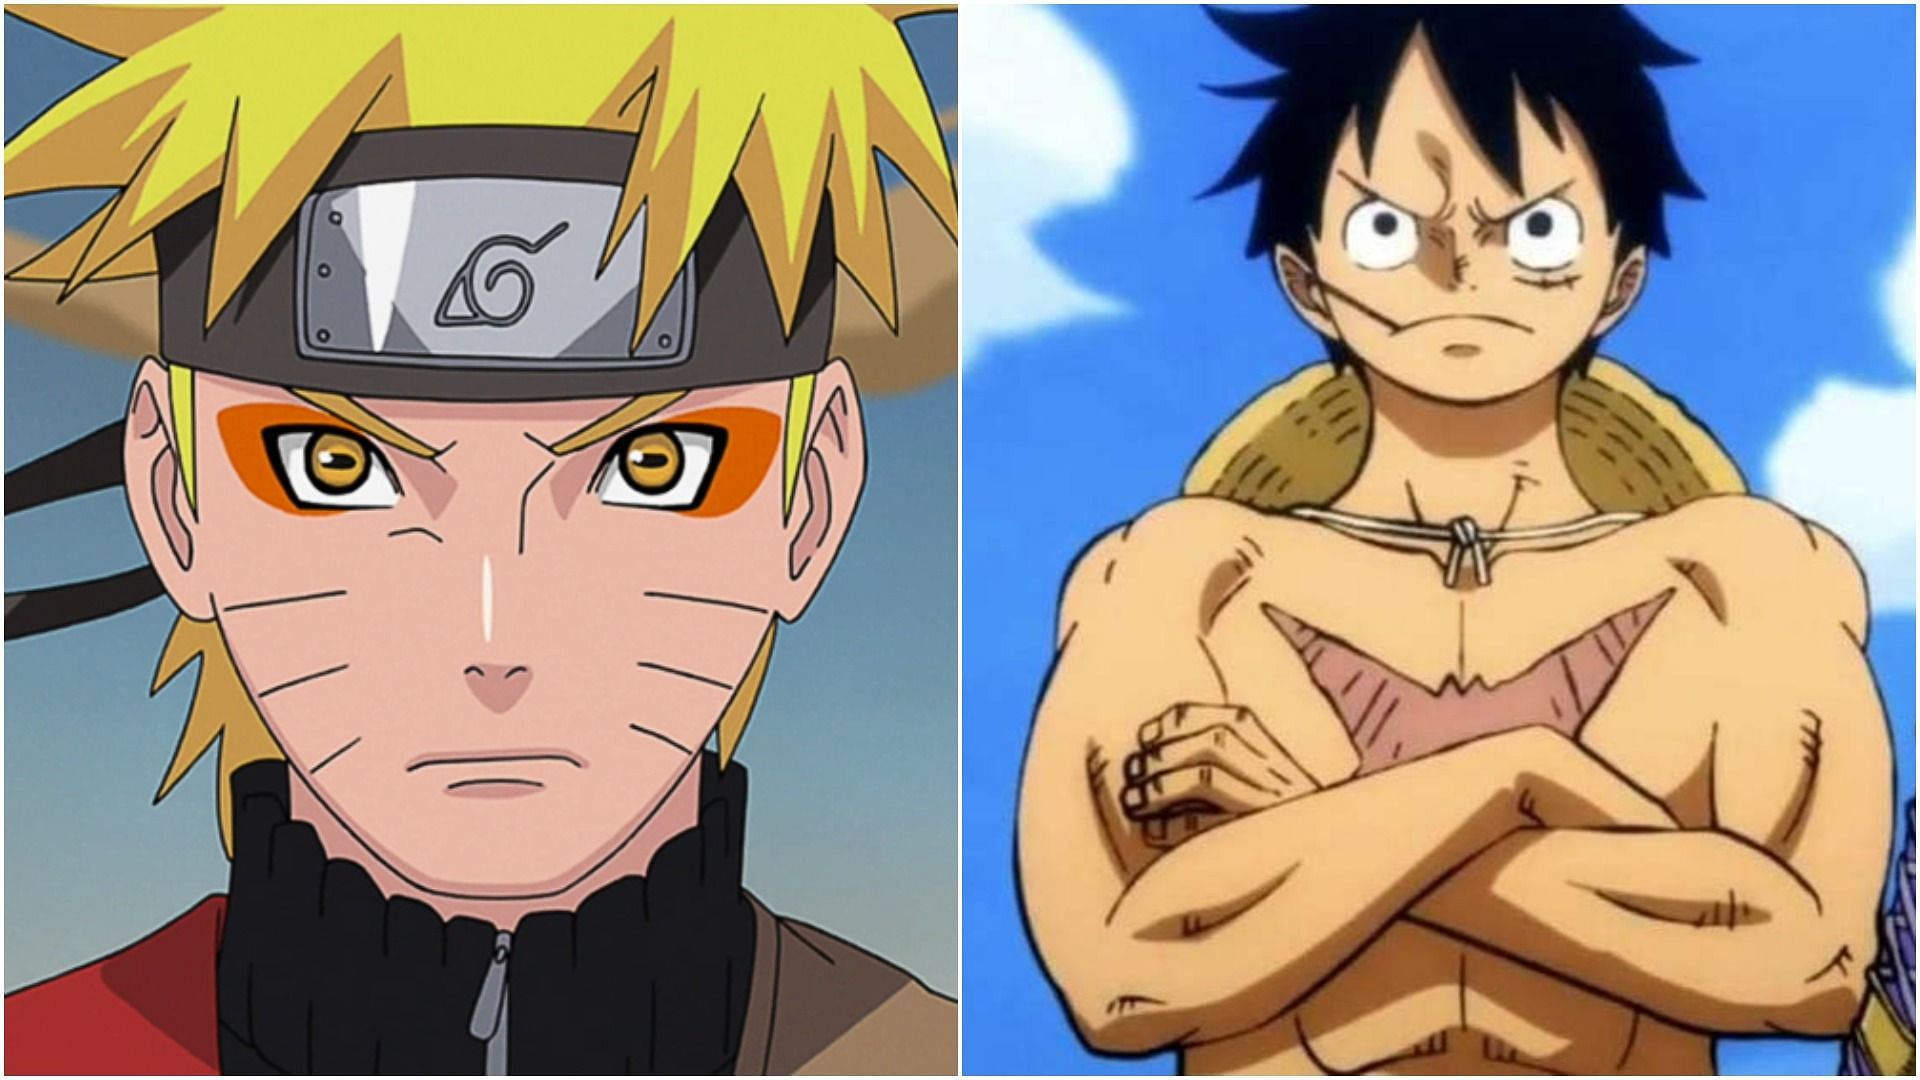 Naruto Vs Luffy (One Piece): Who Would Win A Fight Between The Two?